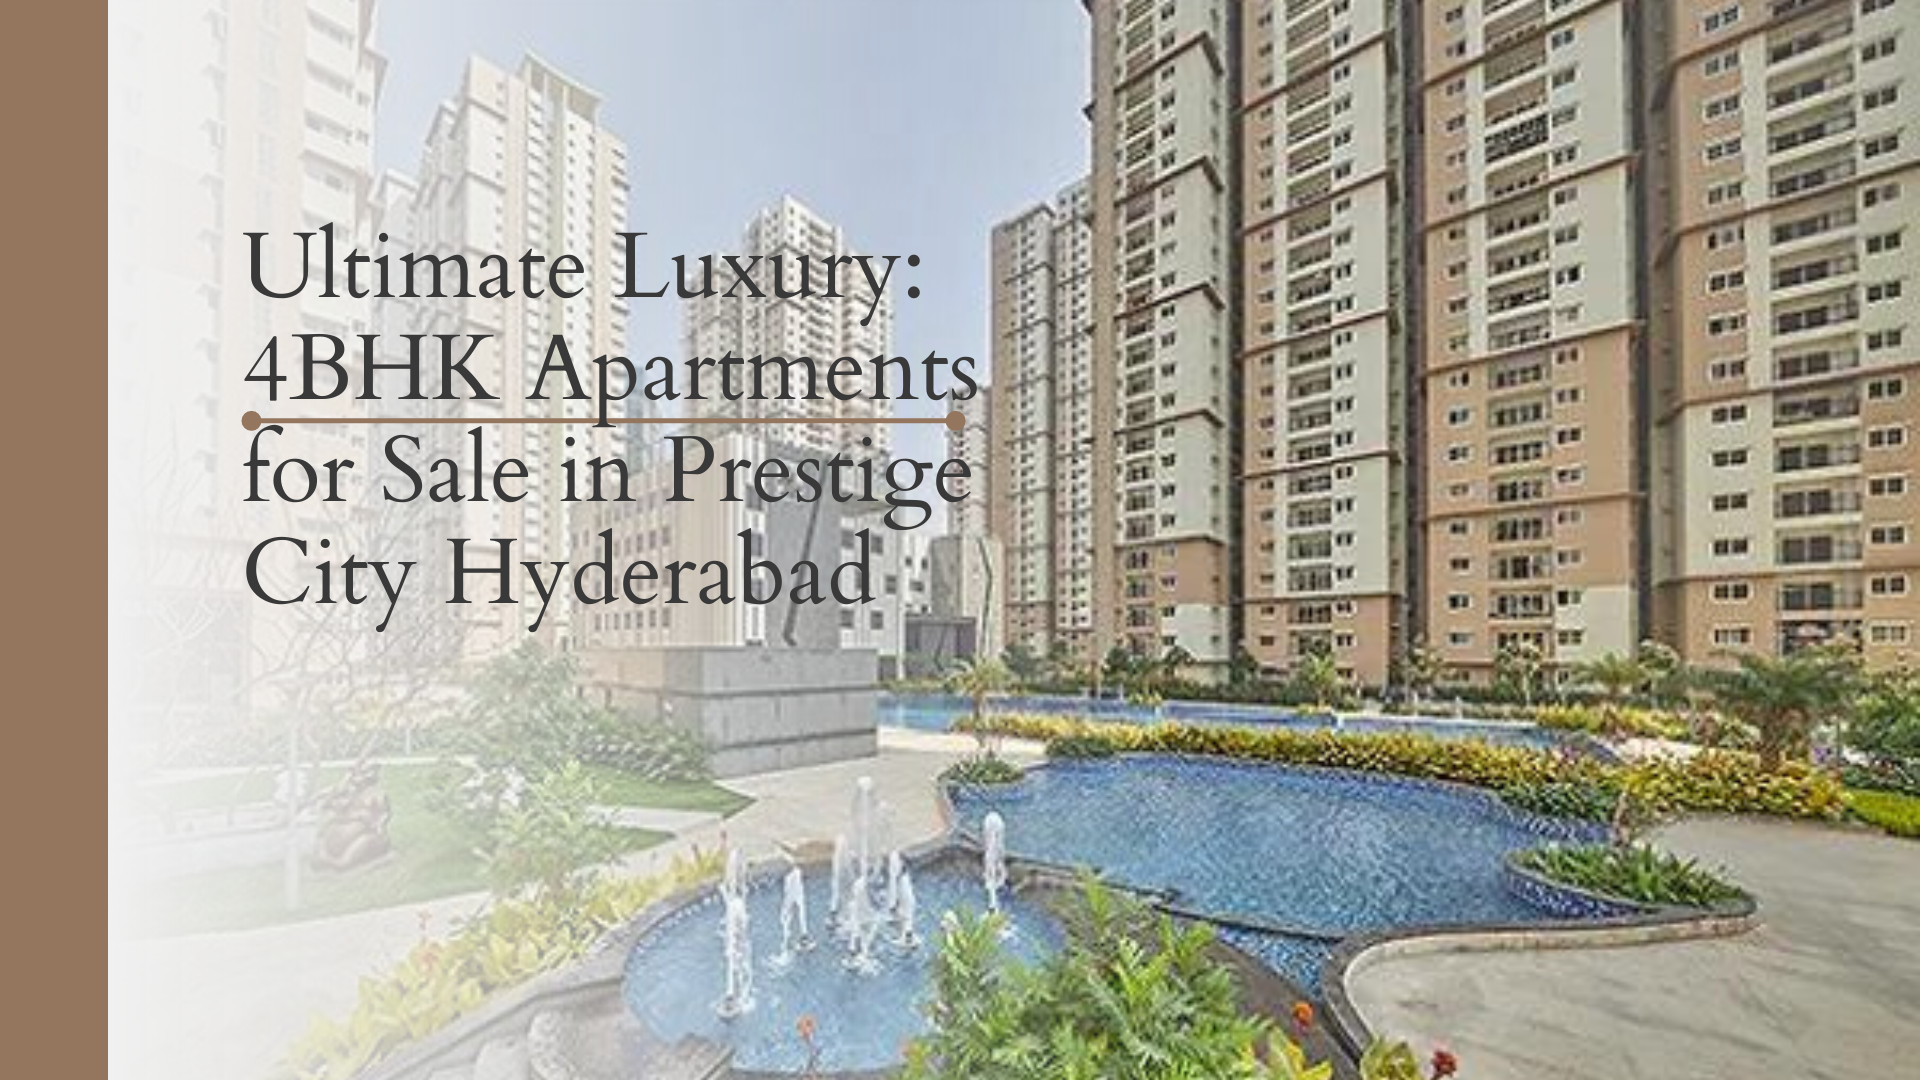 Ultimate Luxury: 4 BHK Apartments for Sale in Prestige City Hyderabad